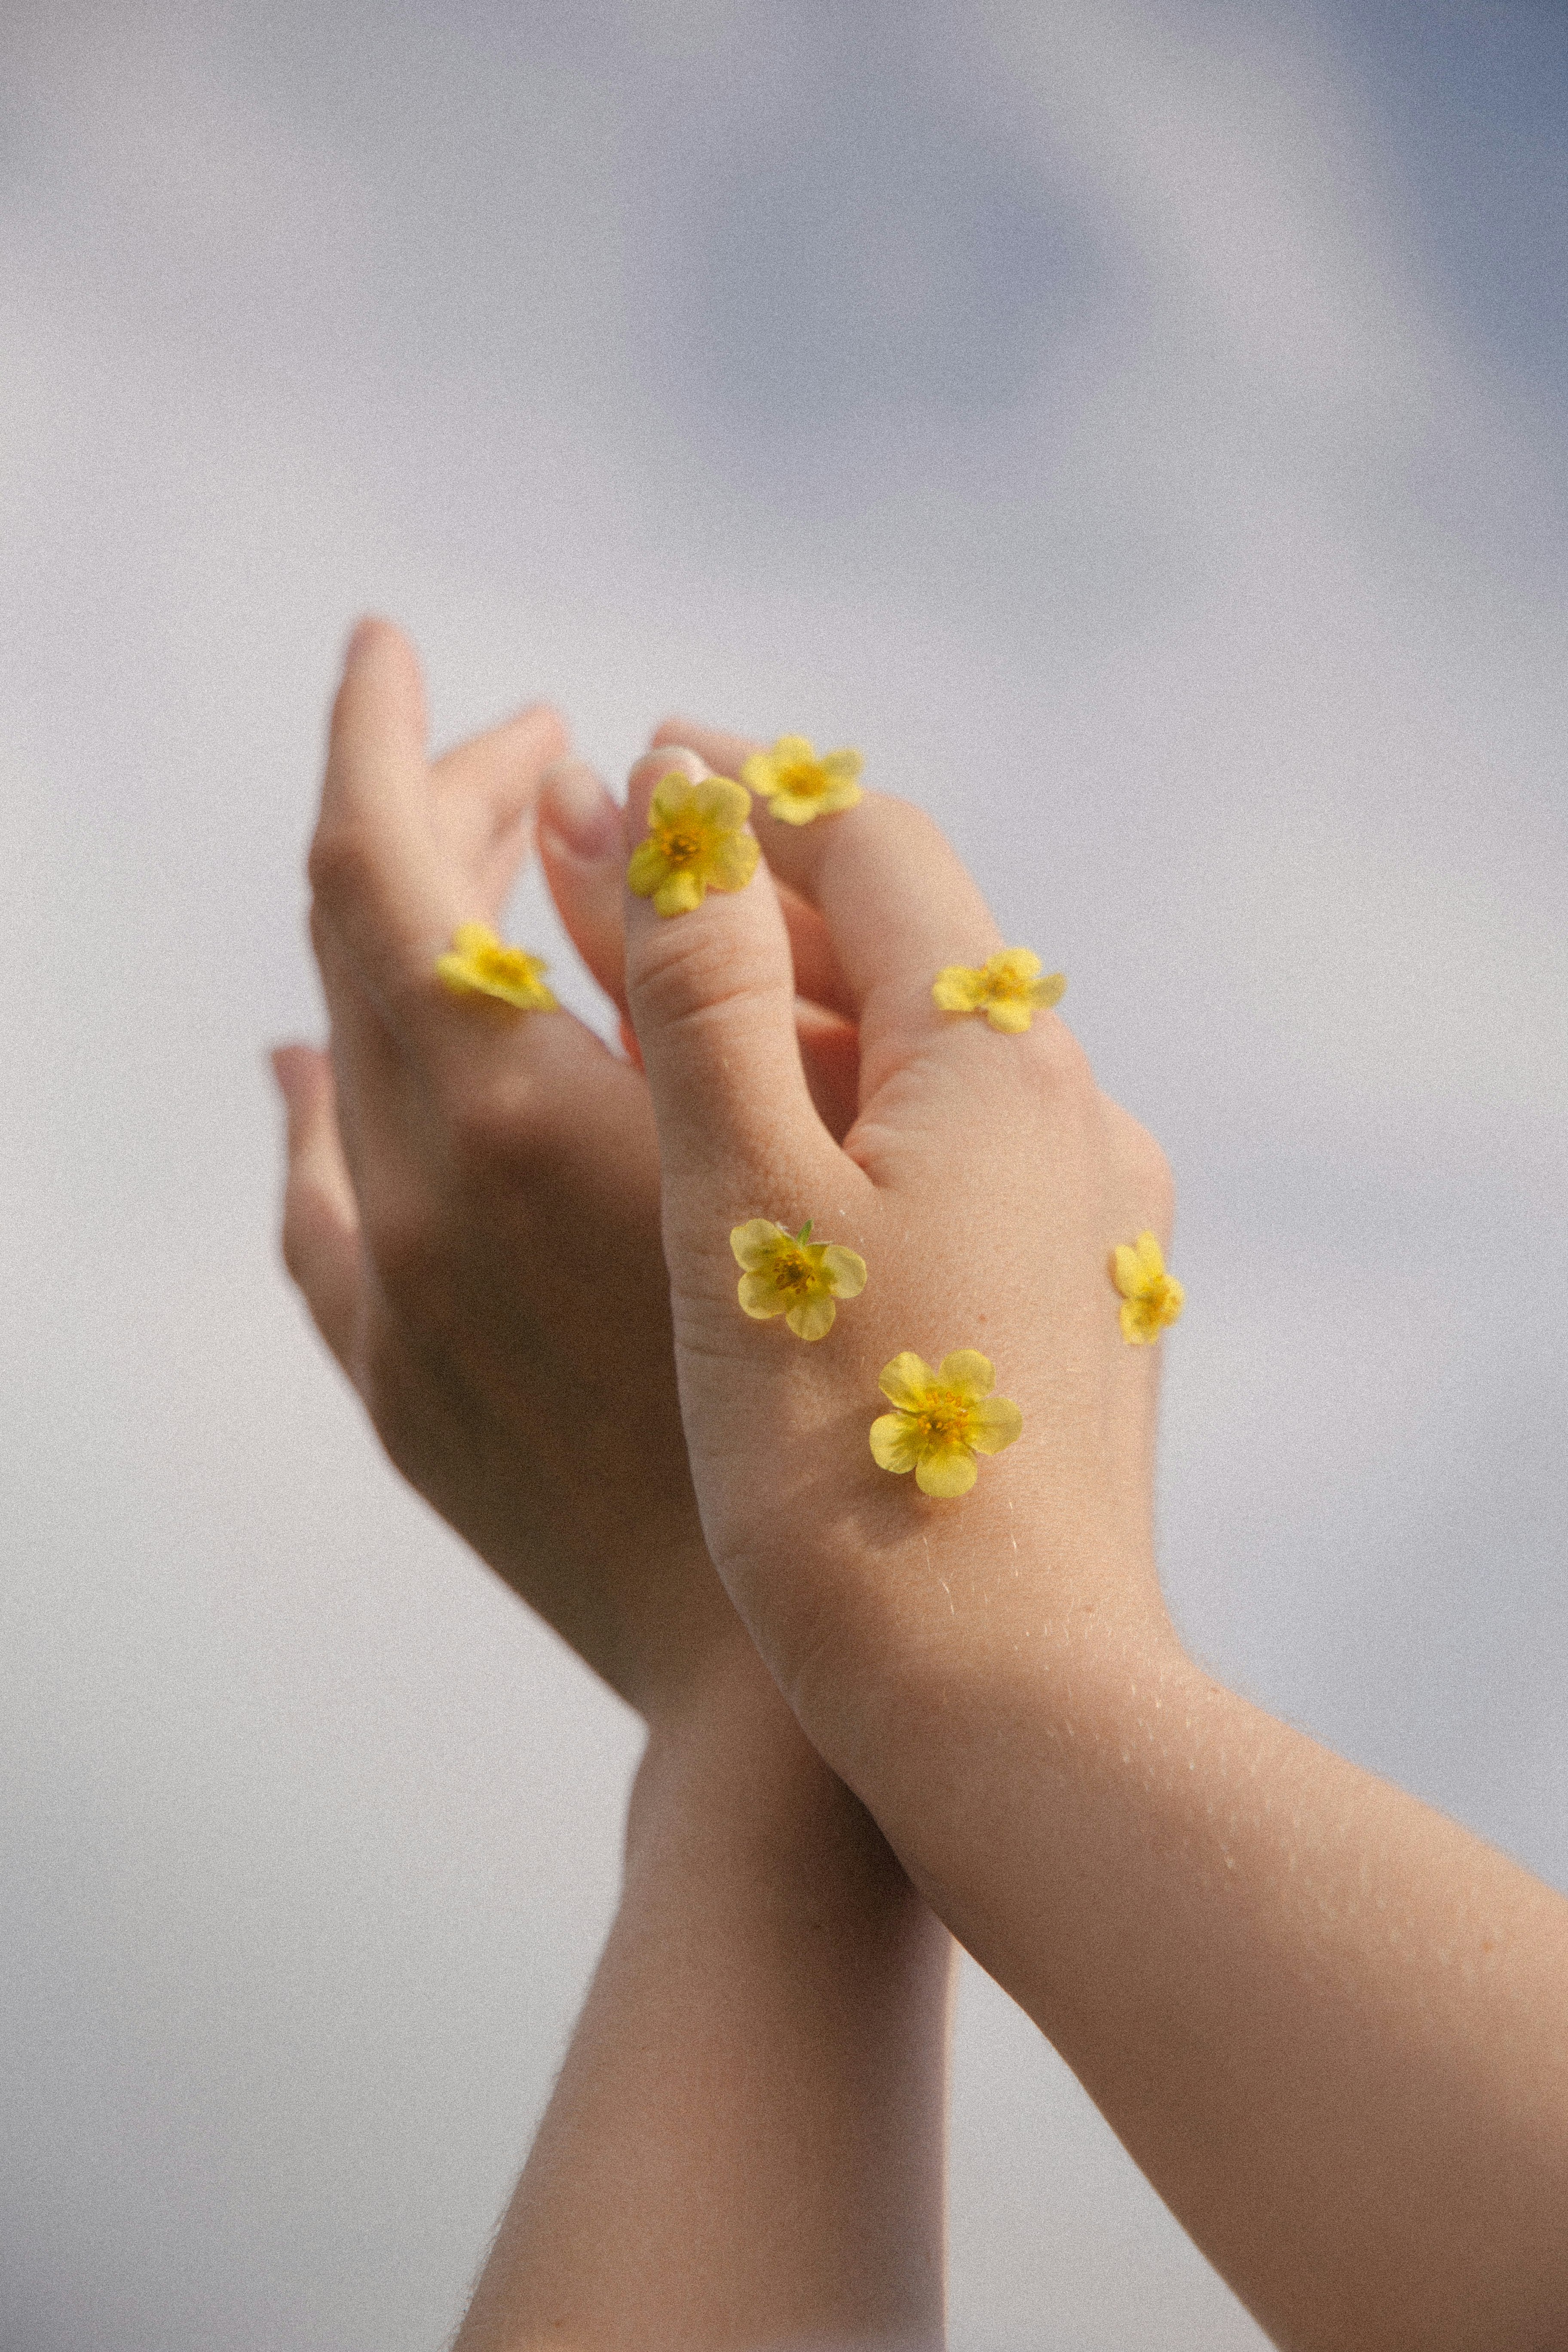 person holding yellow flower petals